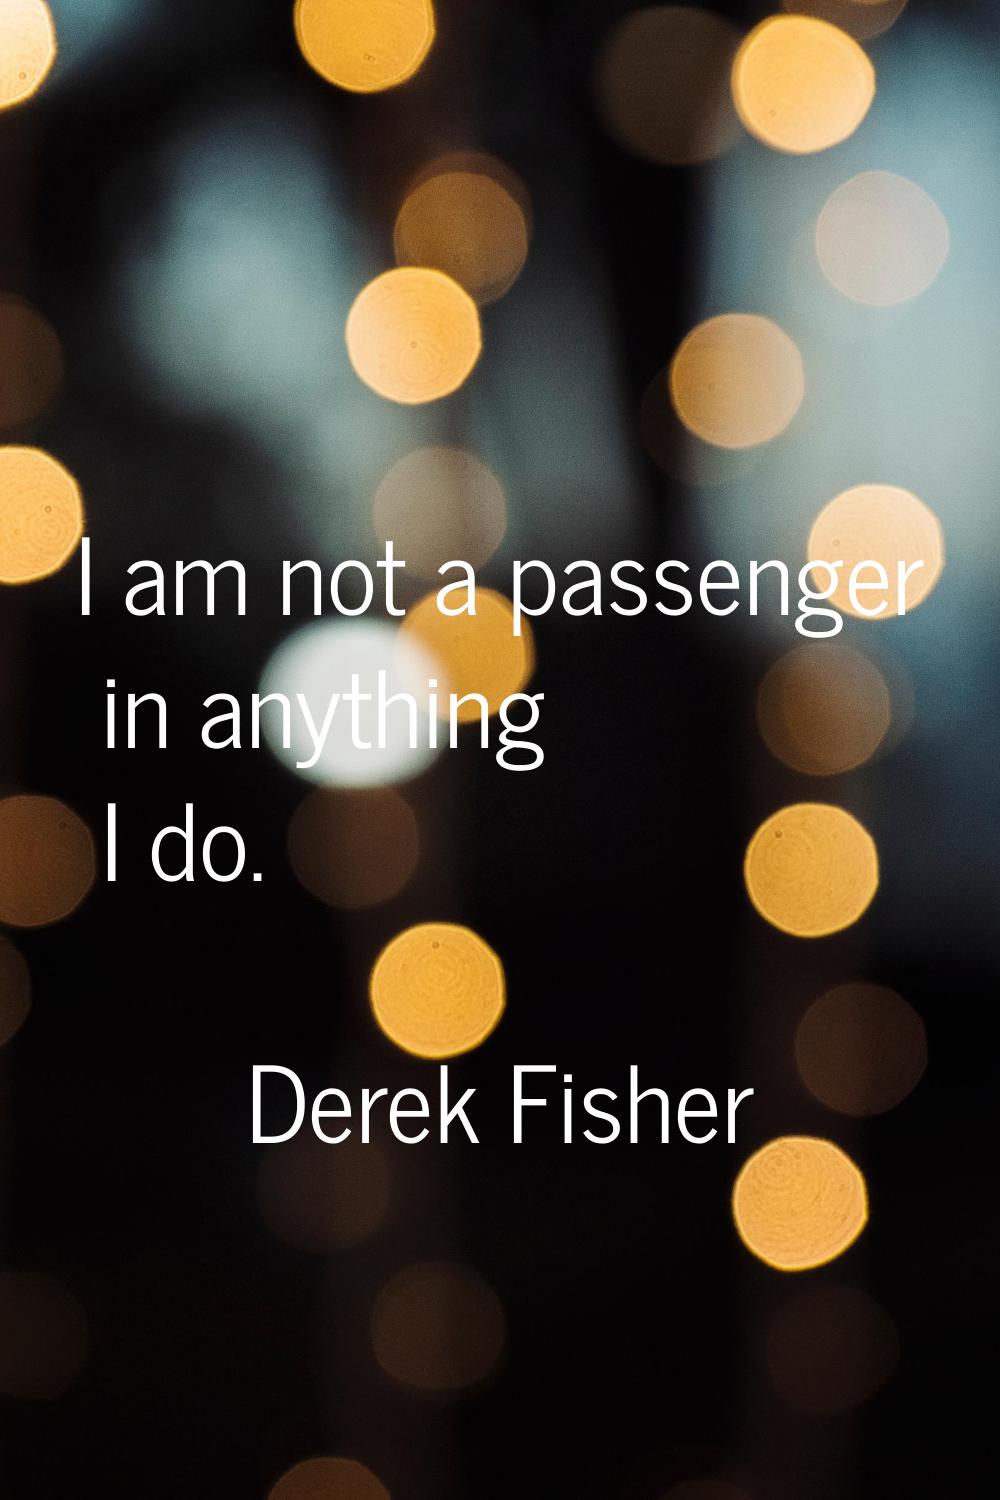 I am not a passenger in anything I do.